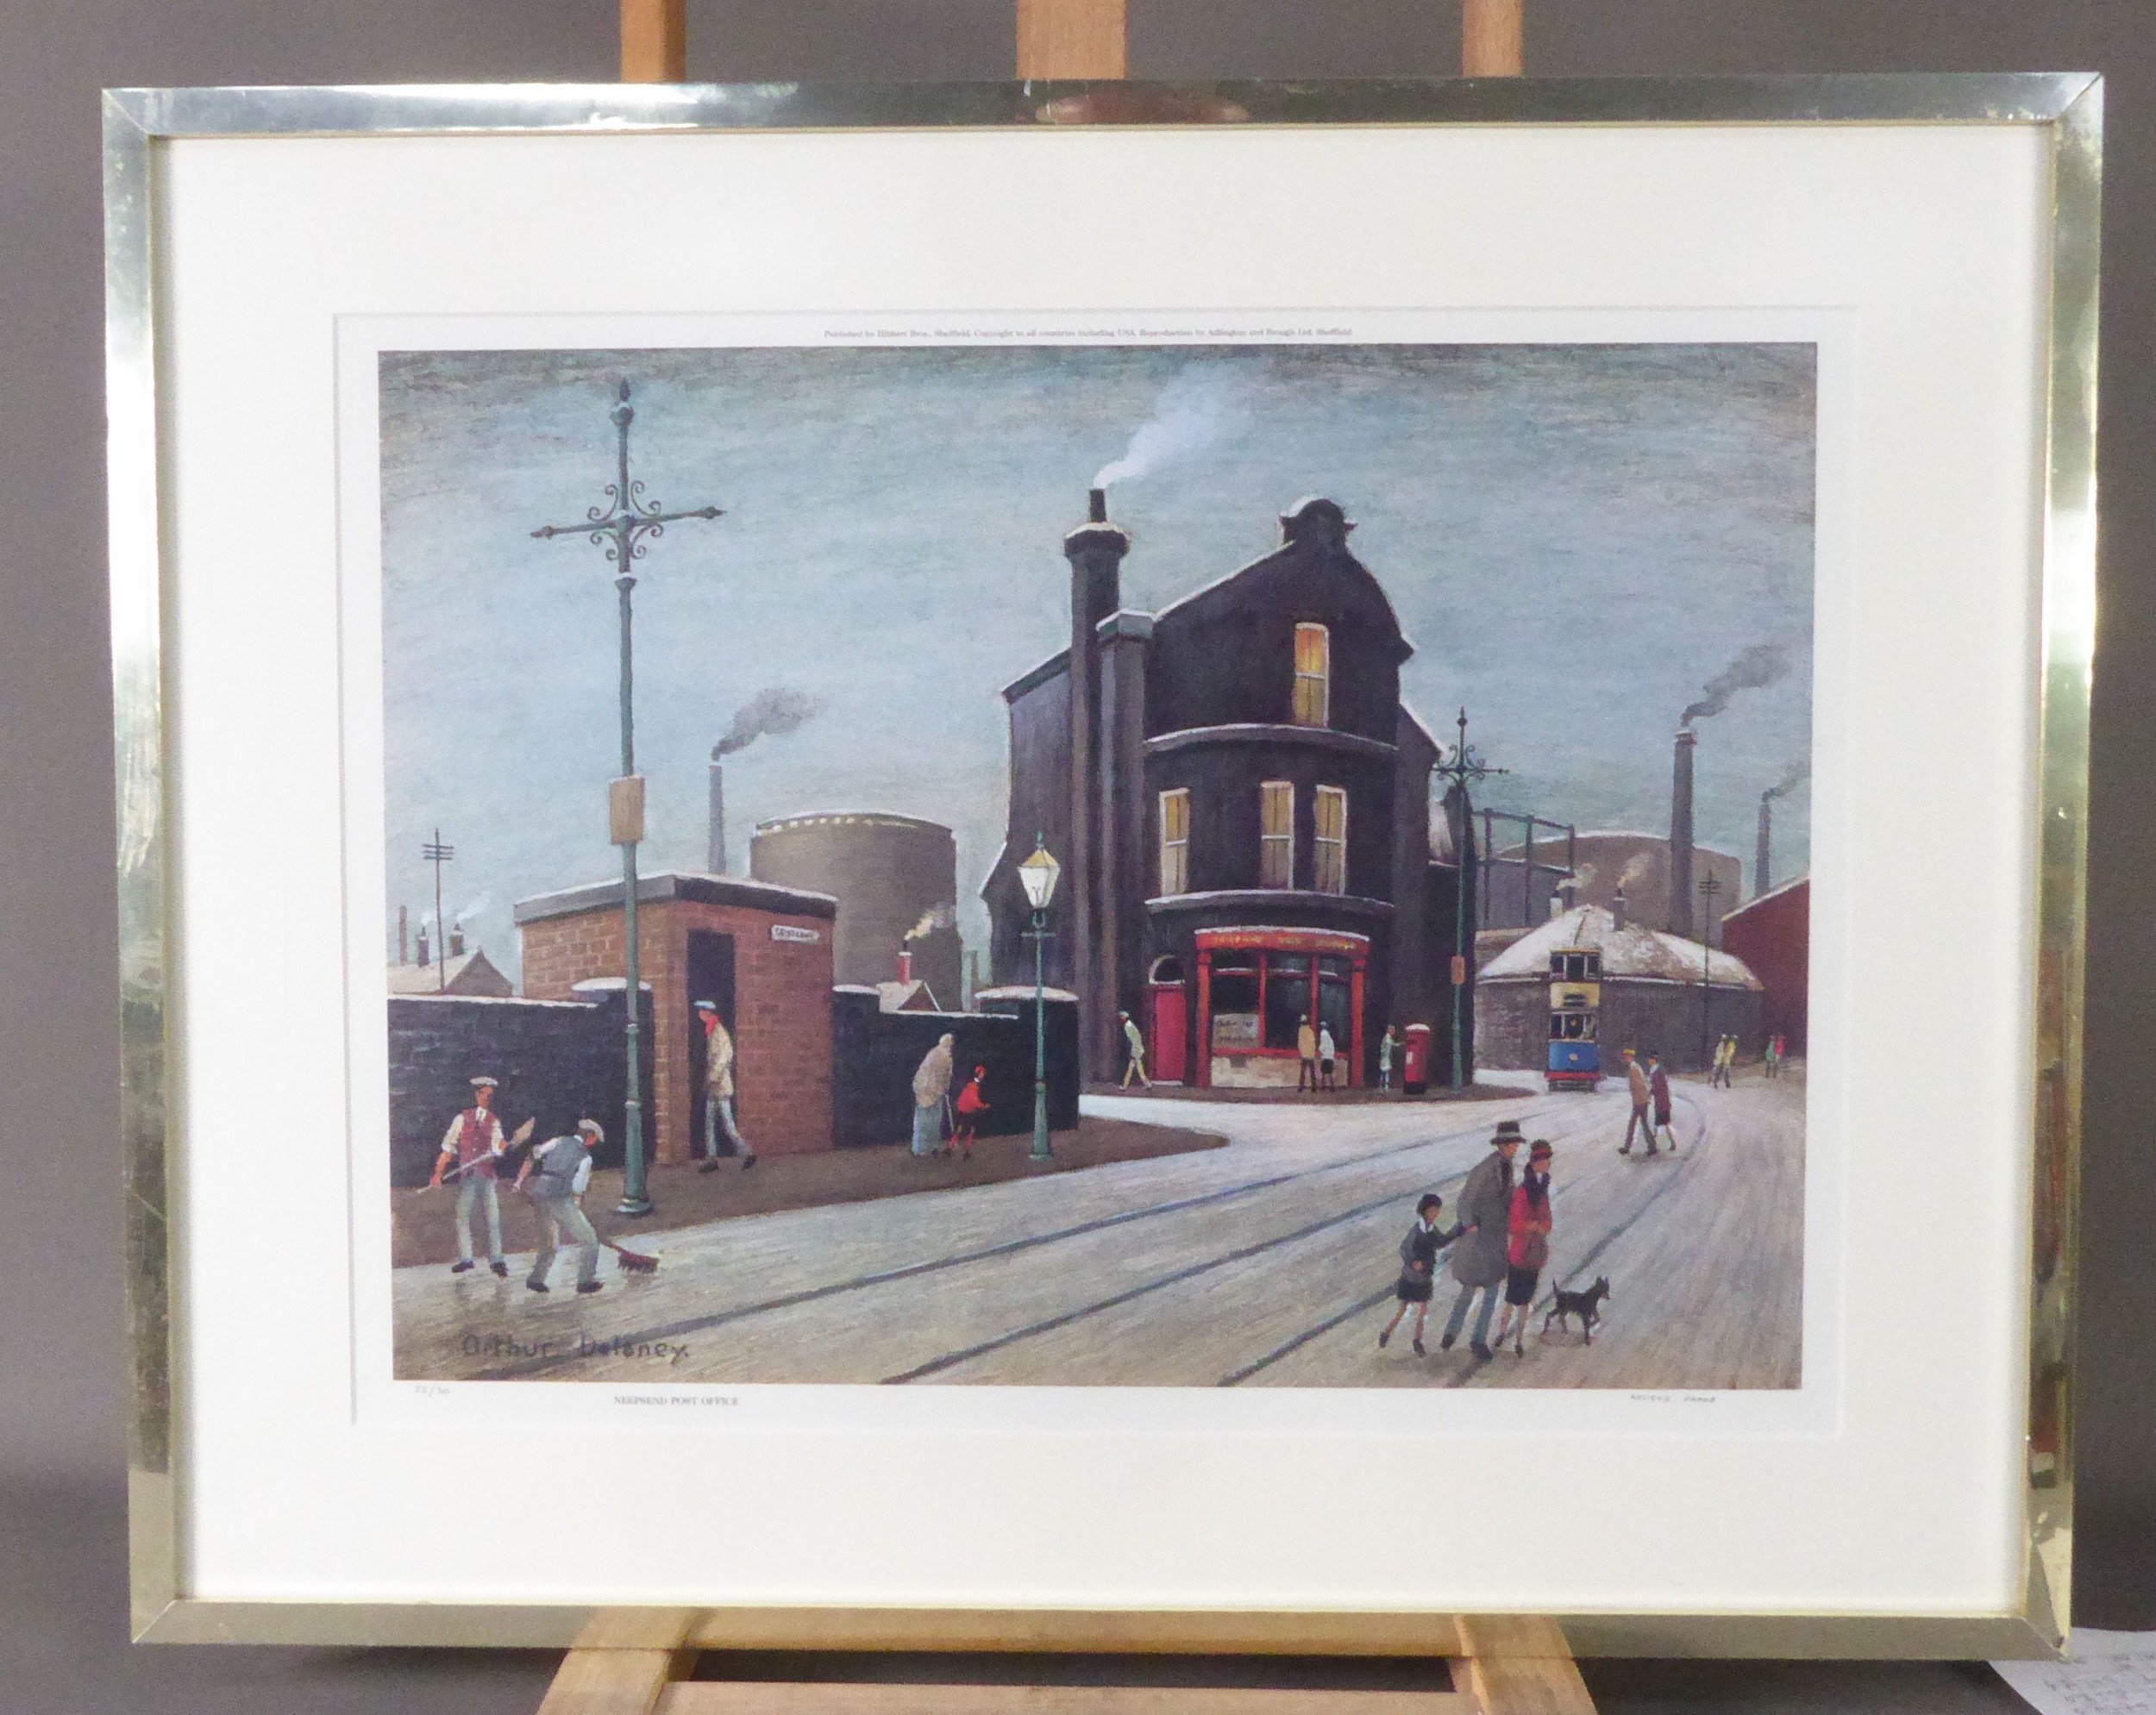 ARTHUR DELANEY ARTIST SIGNED ARTIST'S PROOF COLOUR PRINT Piccadilly, Manchester Signed in pencil - Image 3 of 3